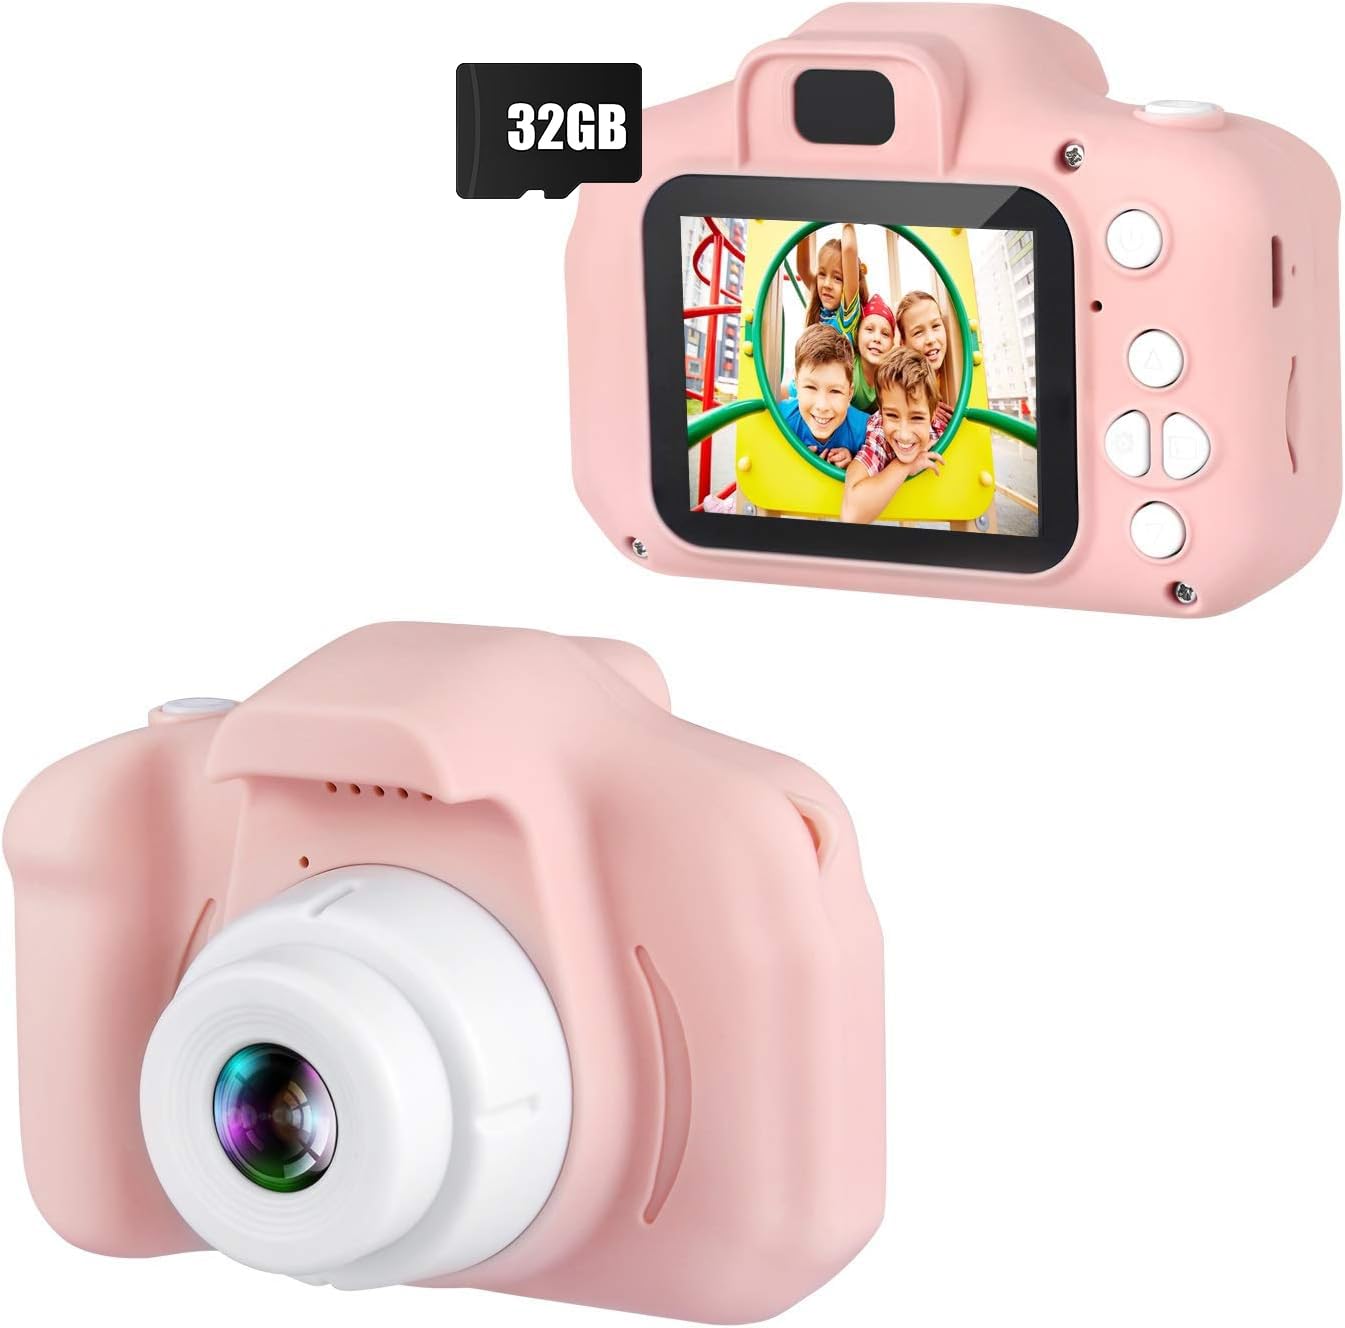 Dartwood 1080p Digital Camera for Kids with 2.0” Color Display Screen & Micro-SD Card Slot for Children - 32GB SD Card Included (Pink)